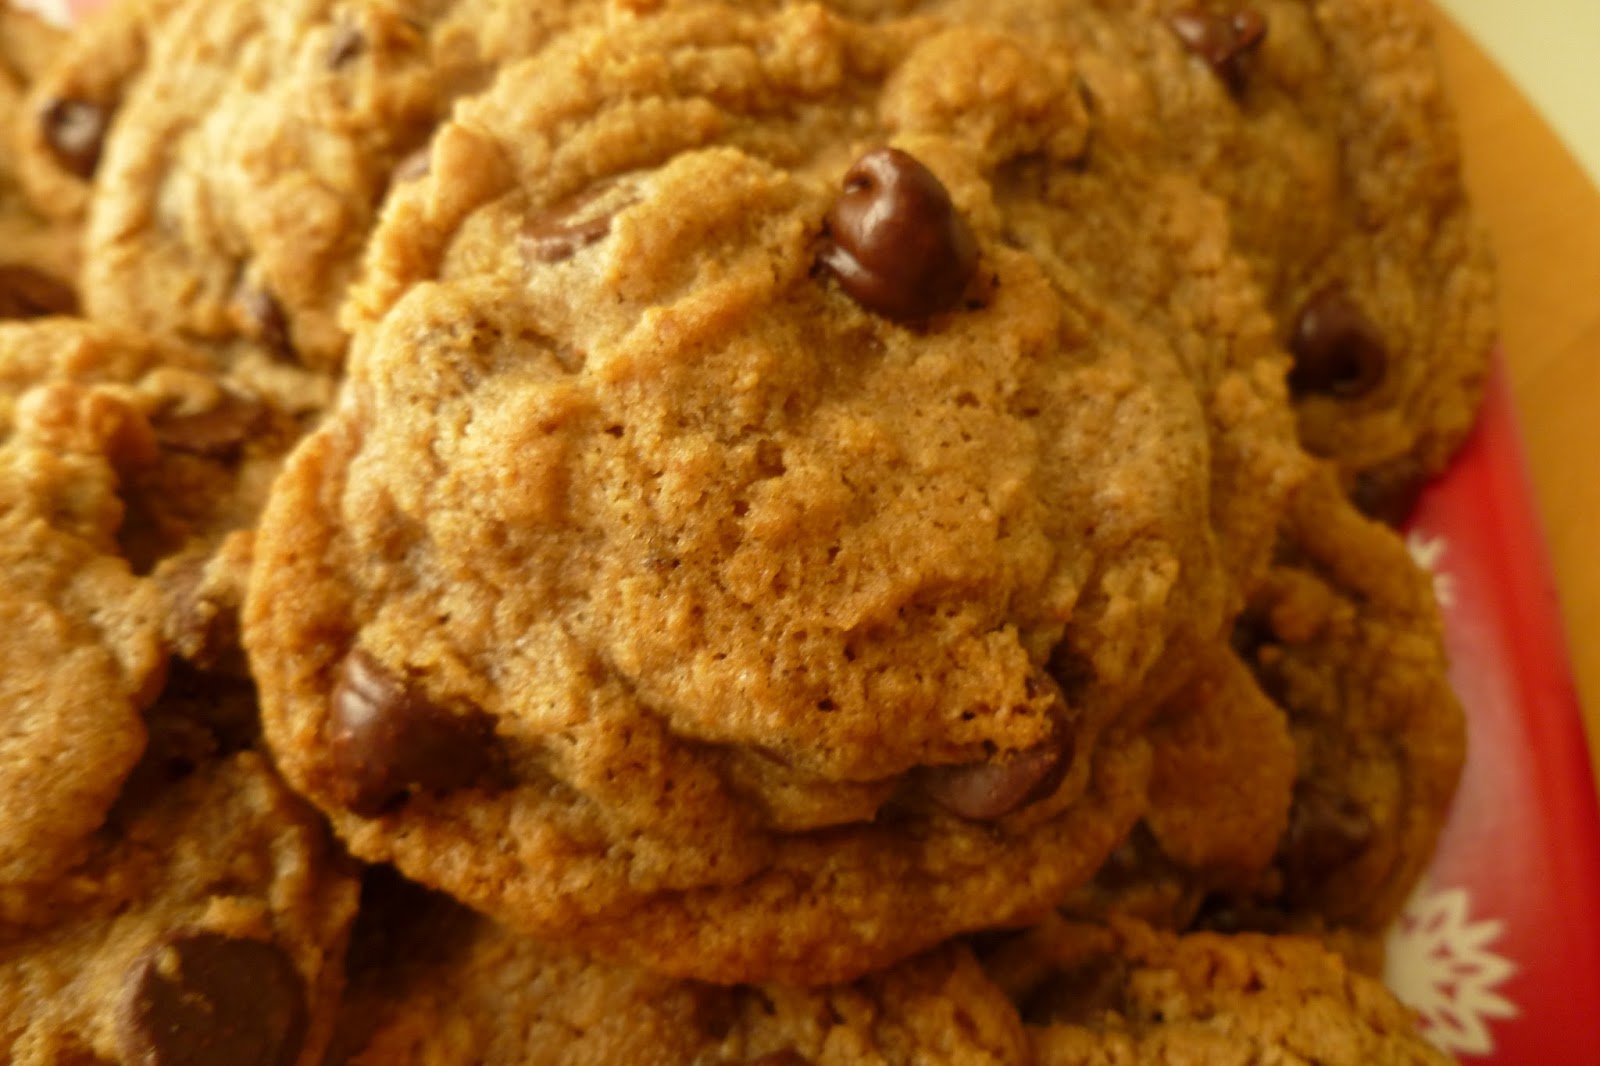 The Pastry Chef's Baking: Chocolate Chip Graham Cracker Cookies